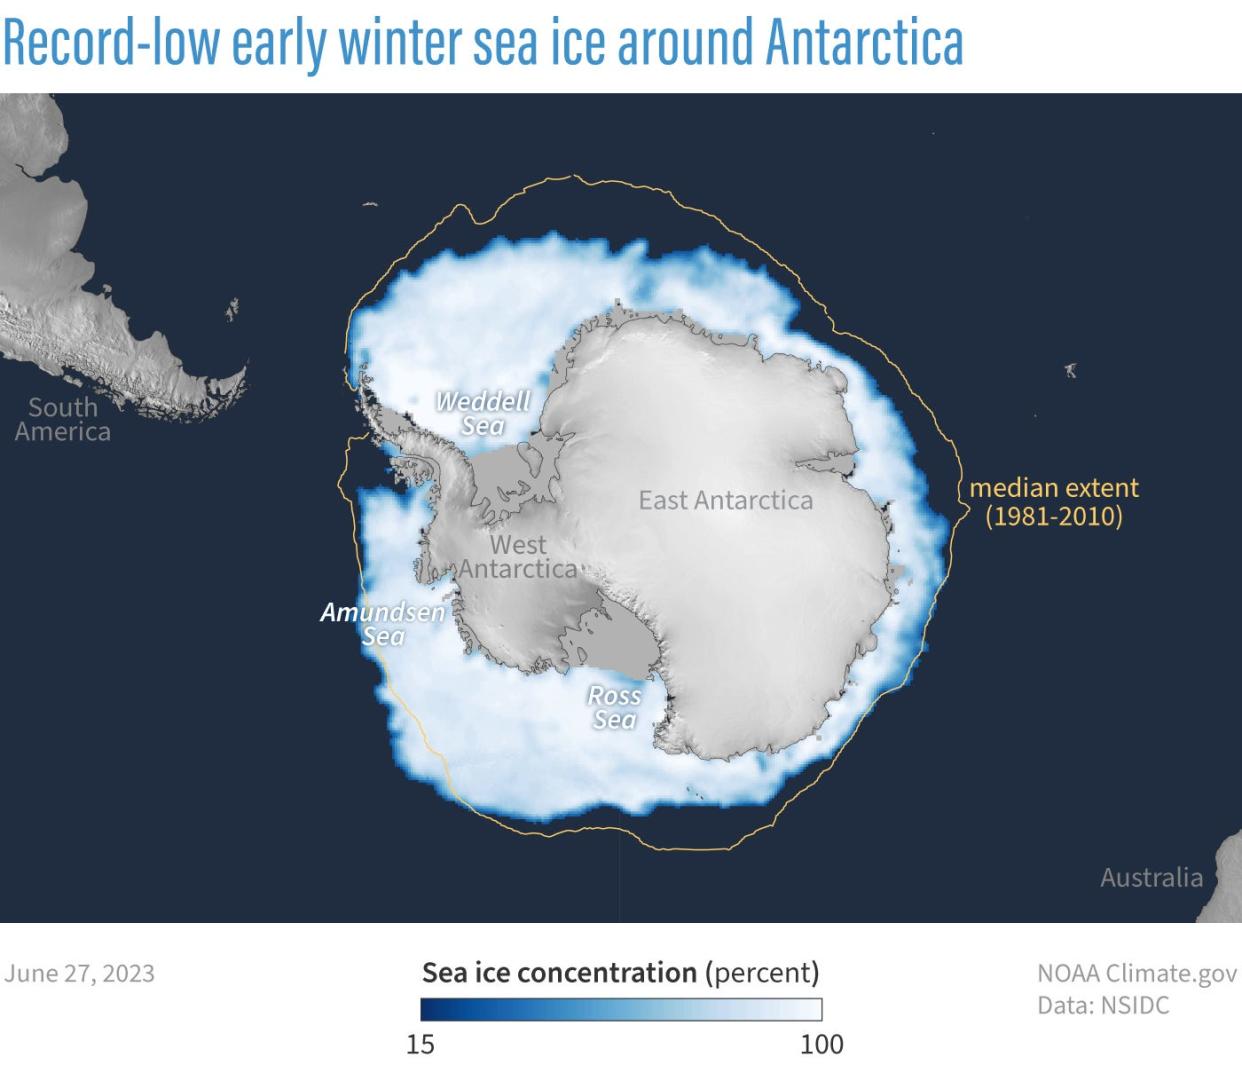 The yellow line shows the median extent of sea ice around Antarctica from 1981-2010. Areas of blue and white show the current extent of sea ice.